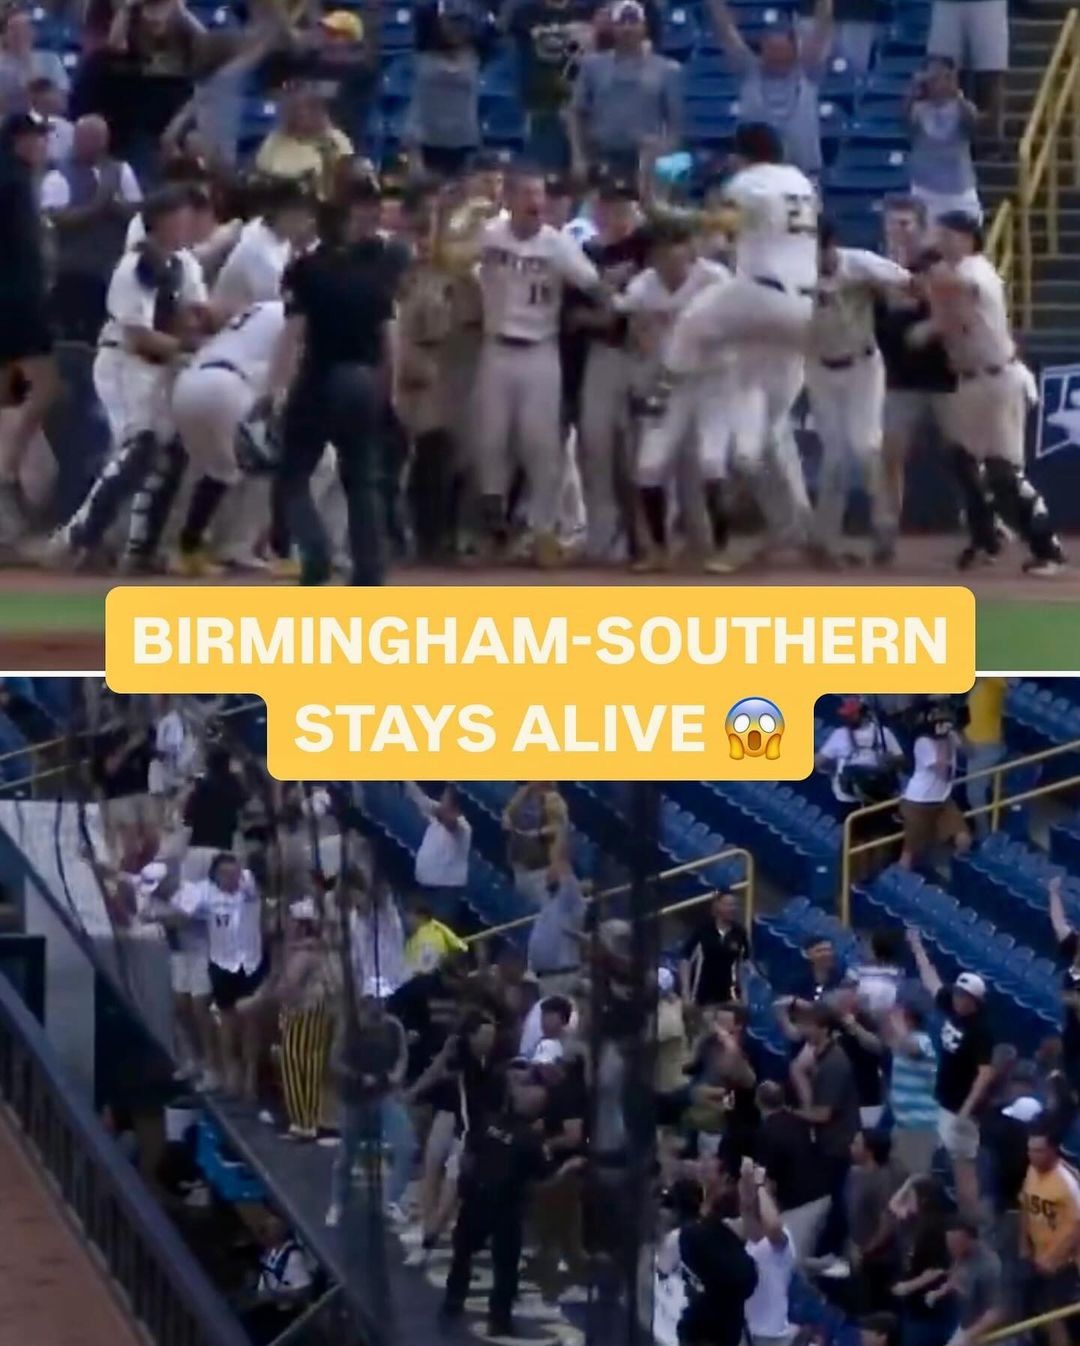 Birmingham-Southern hits a walk-off home run to stay alive in the Division III College World Series ??

On Friday, the s...